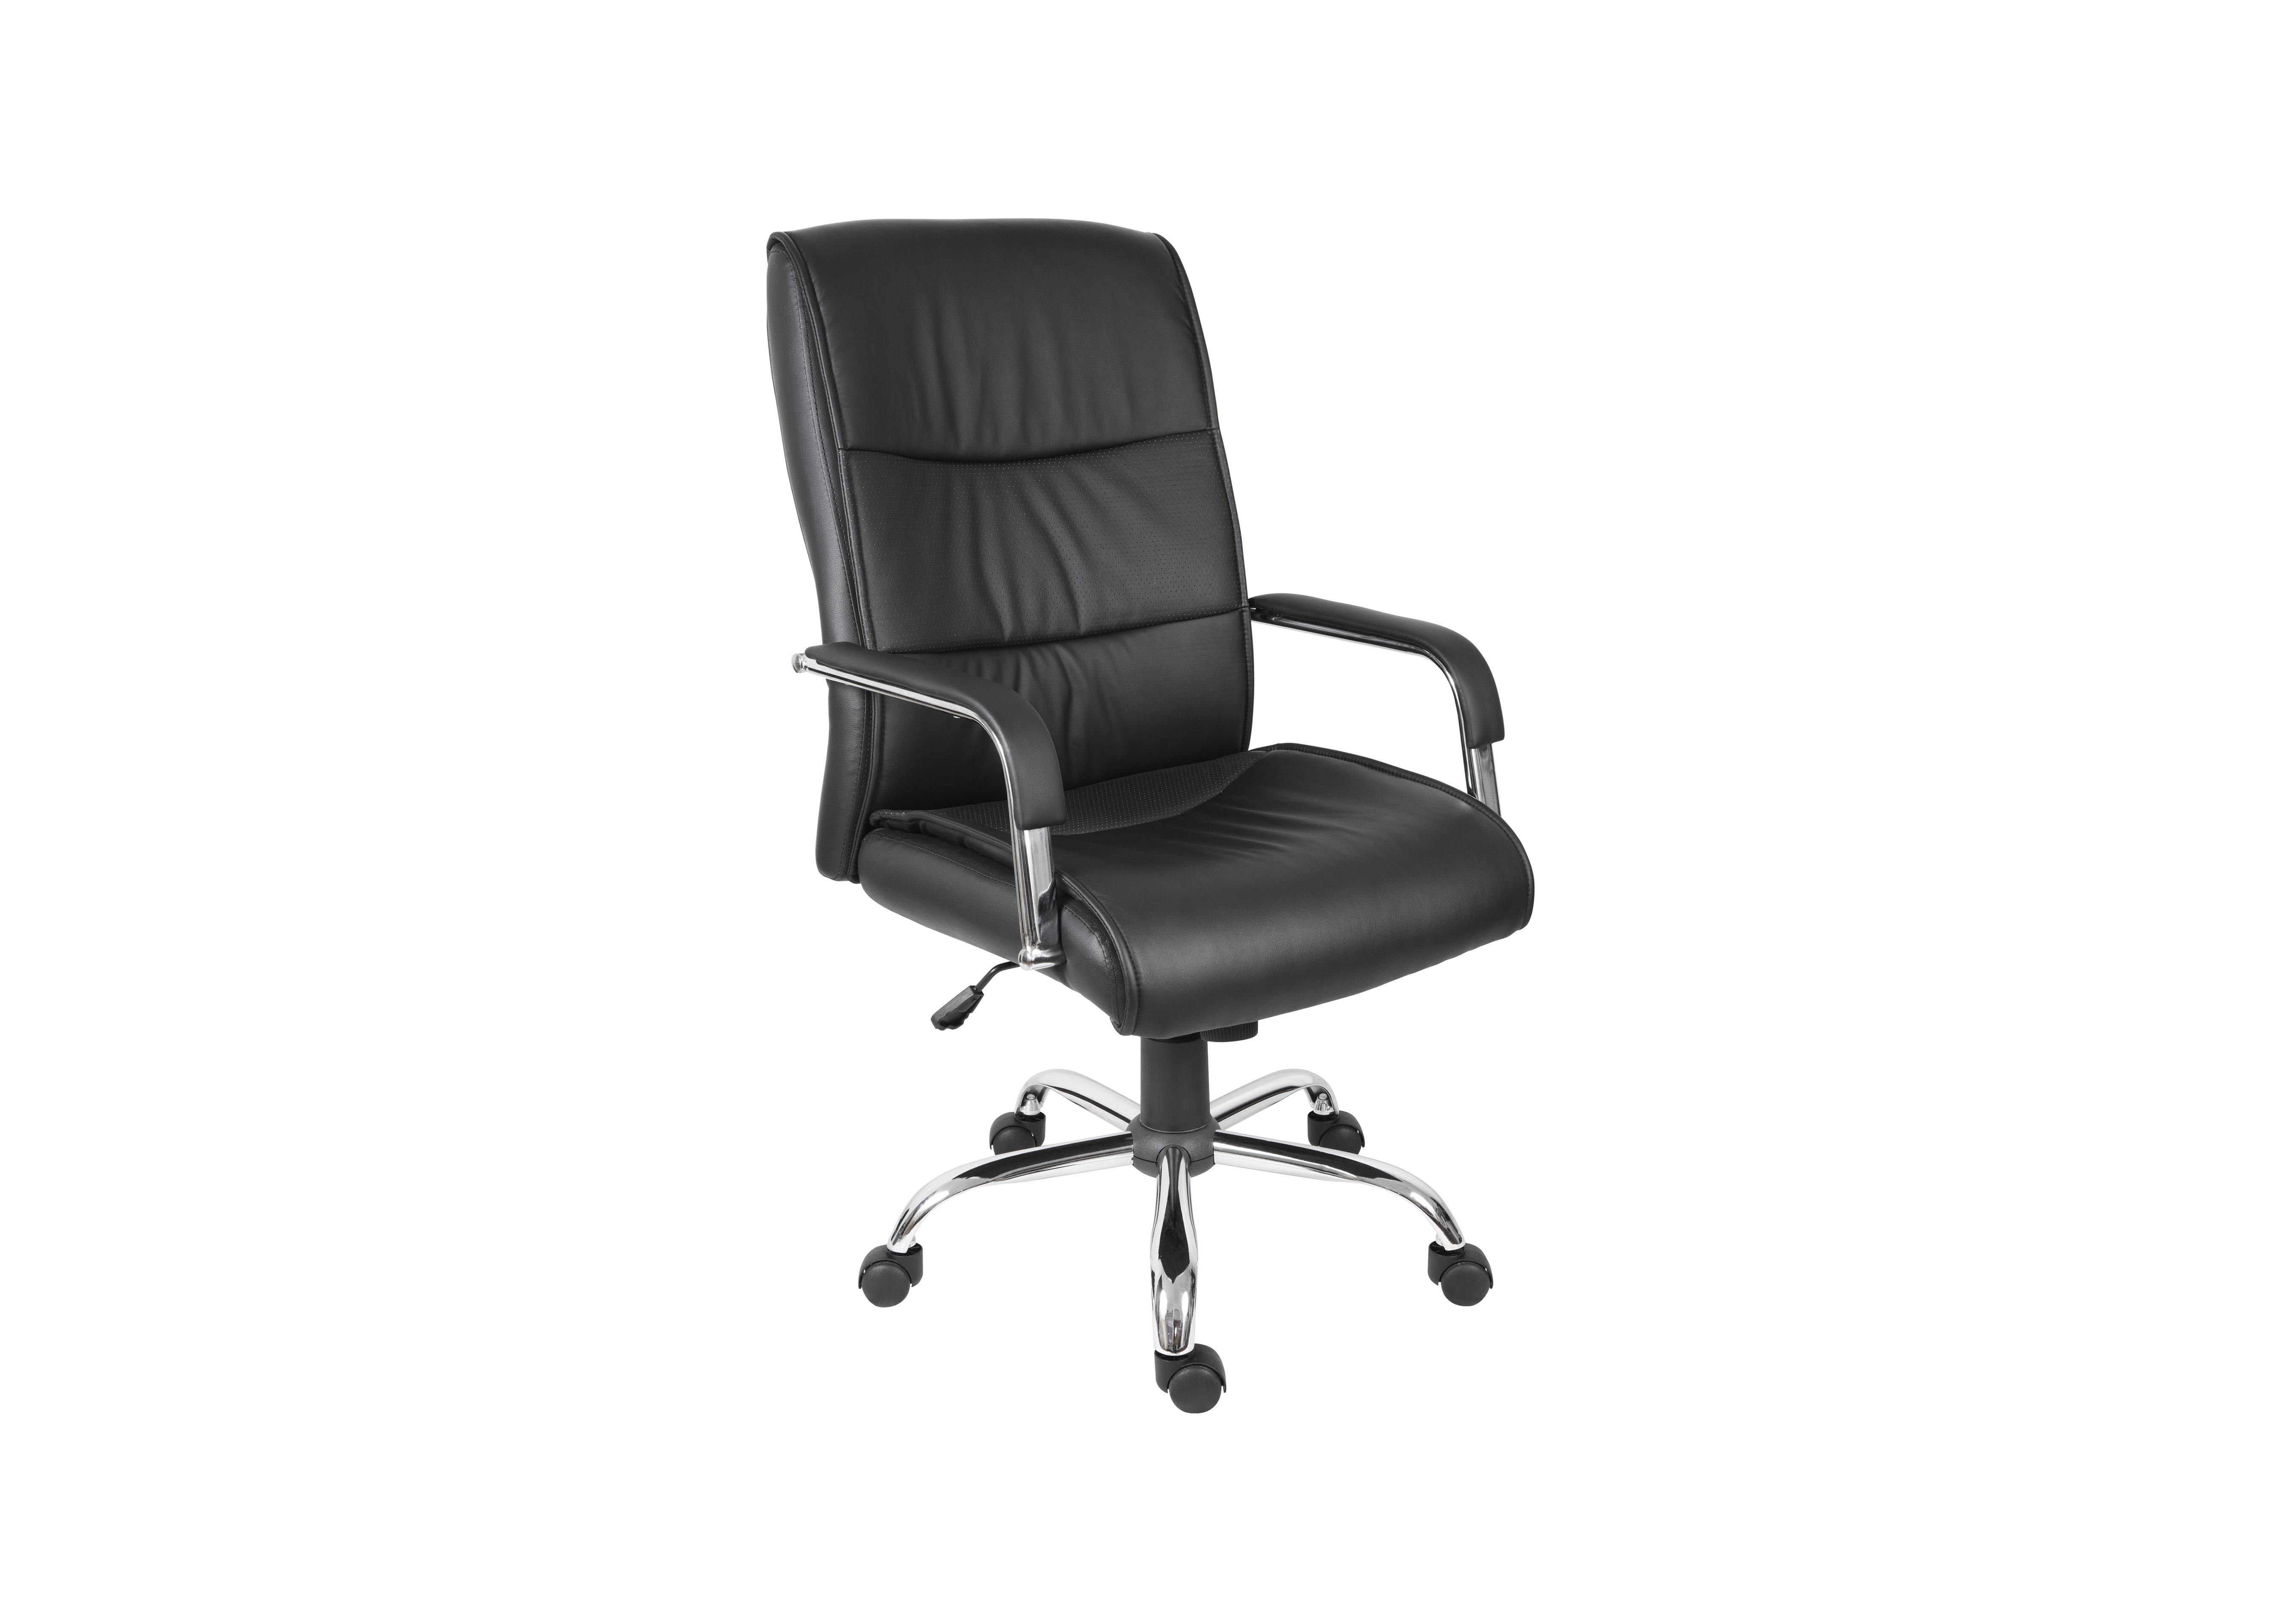 East River Pier 16 Office Chair in Black on Furniture Village